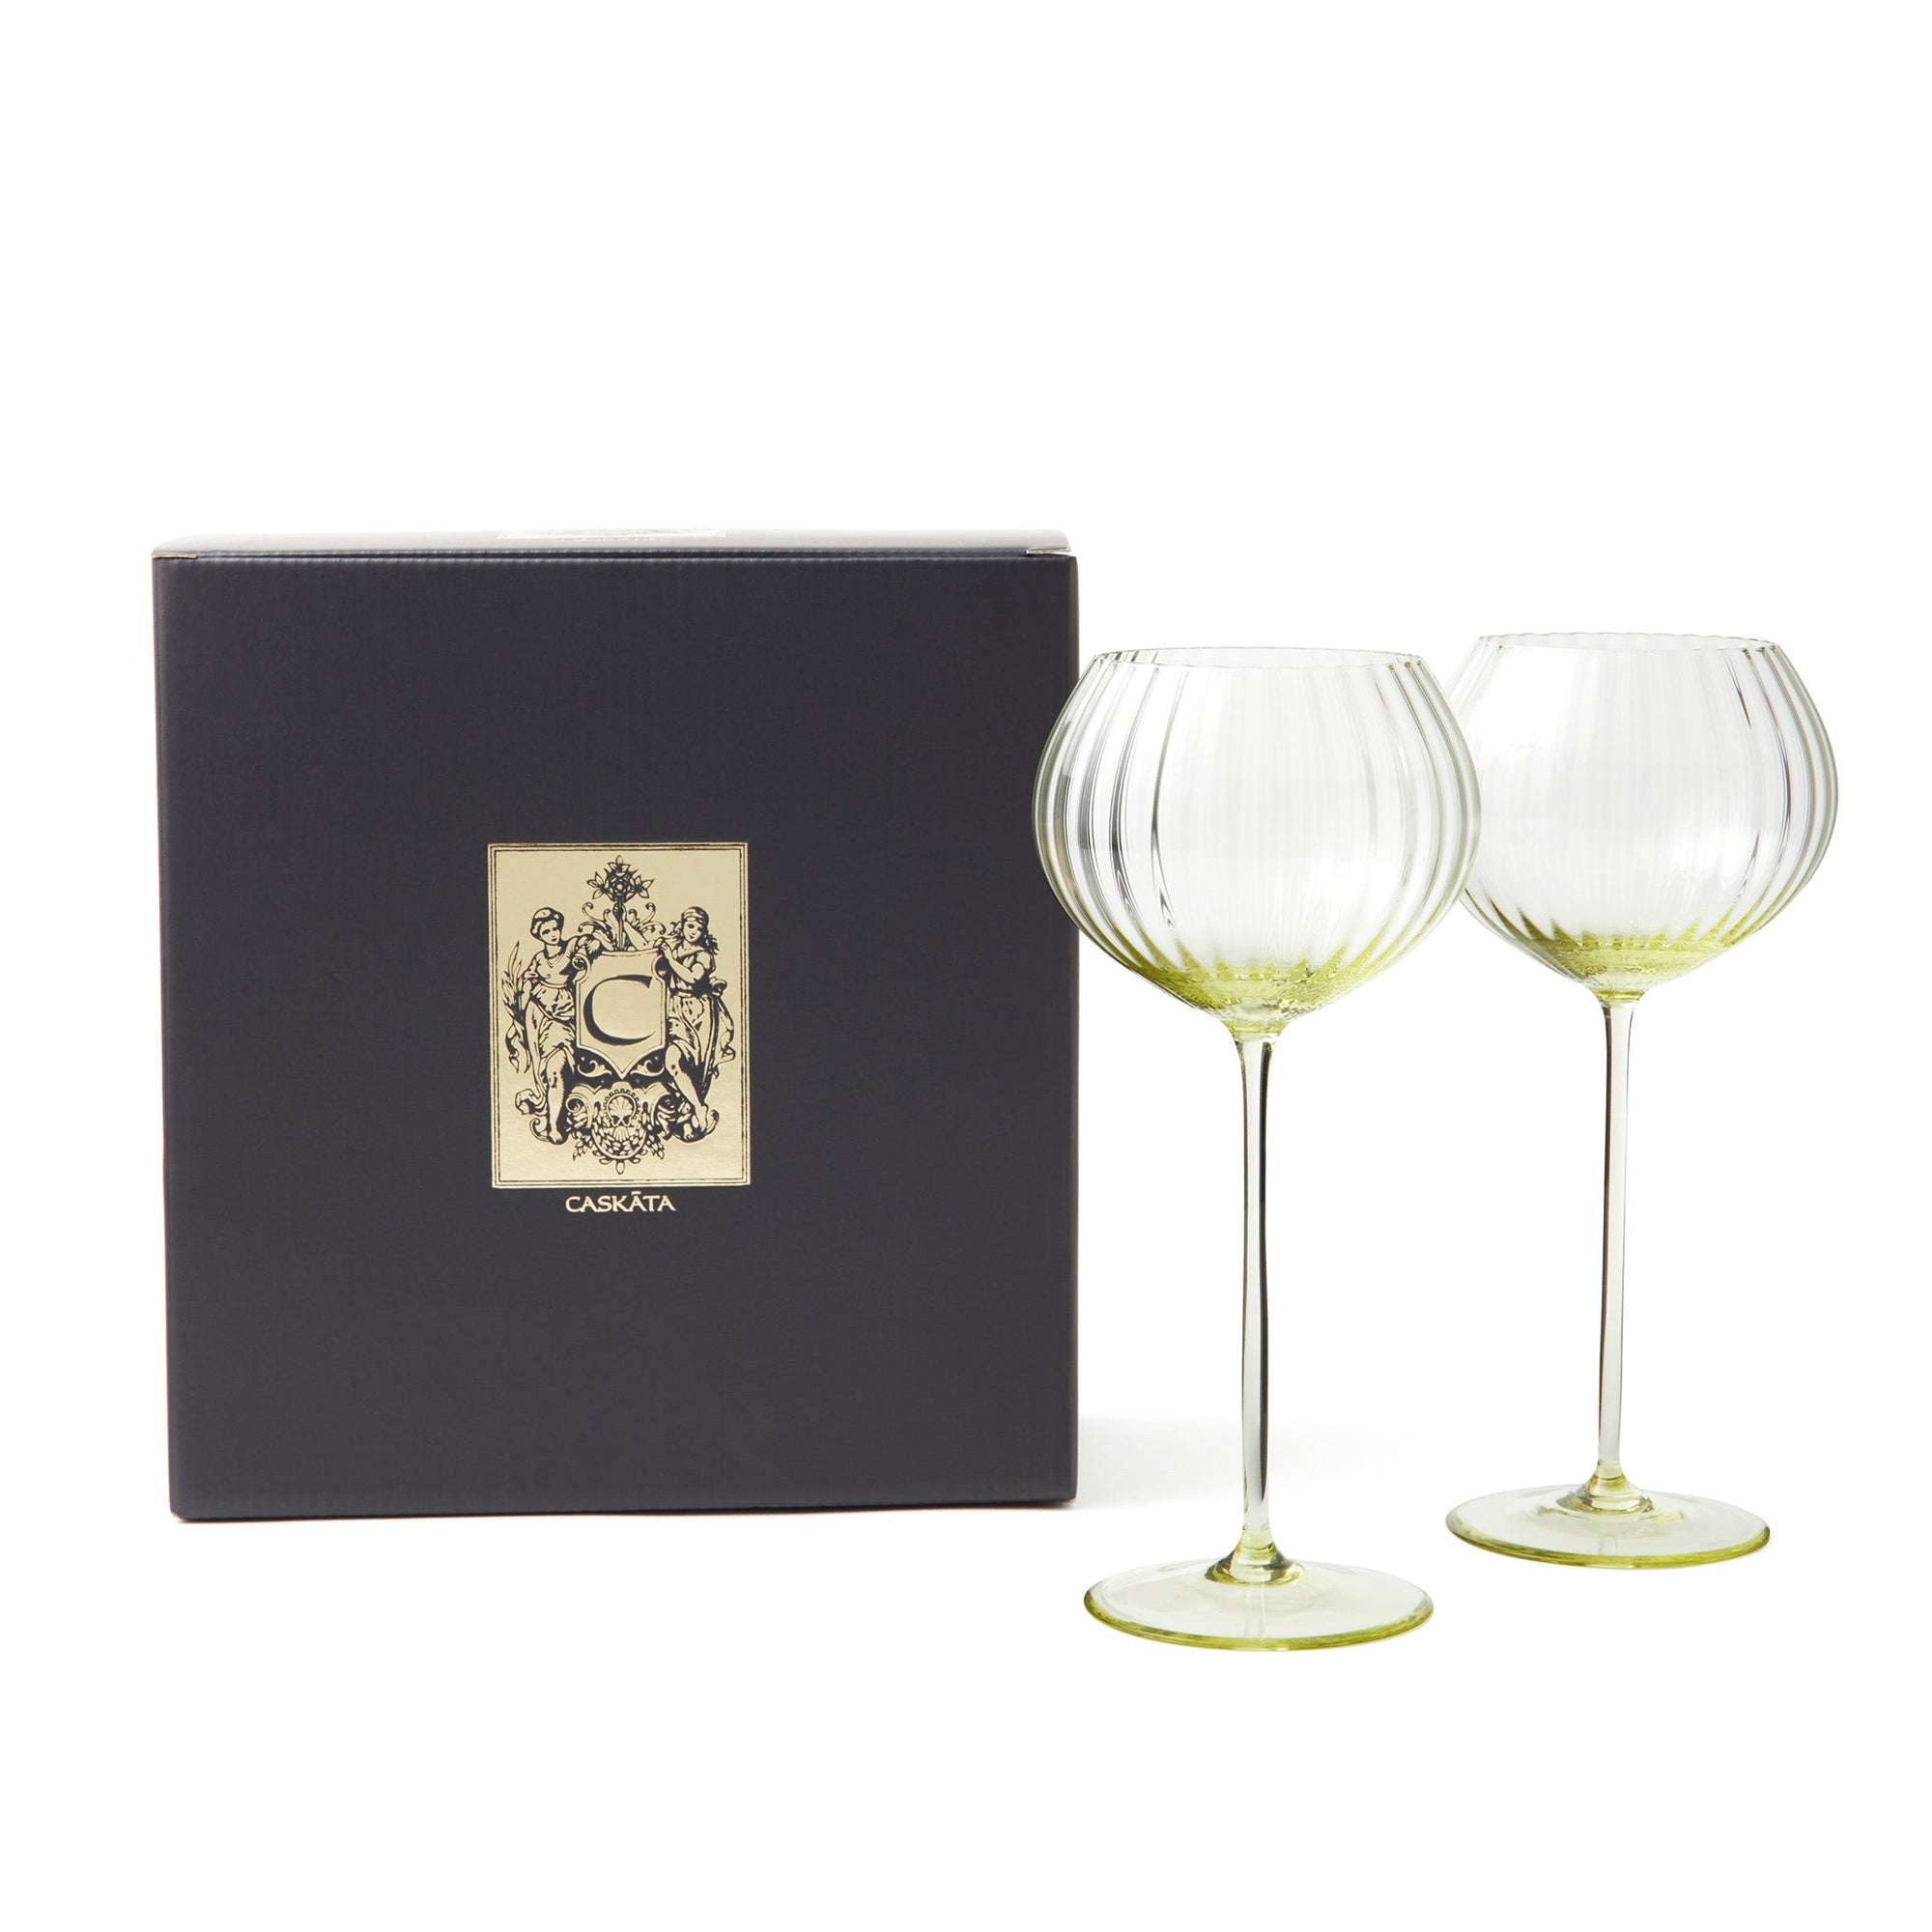 Quinn Starter Set- mouth-blown crystal wine collection includes 2 red wine balloon stems, 2 white wine stems, and 2 stemless glasses in delicate Citrine yellow from Caskata